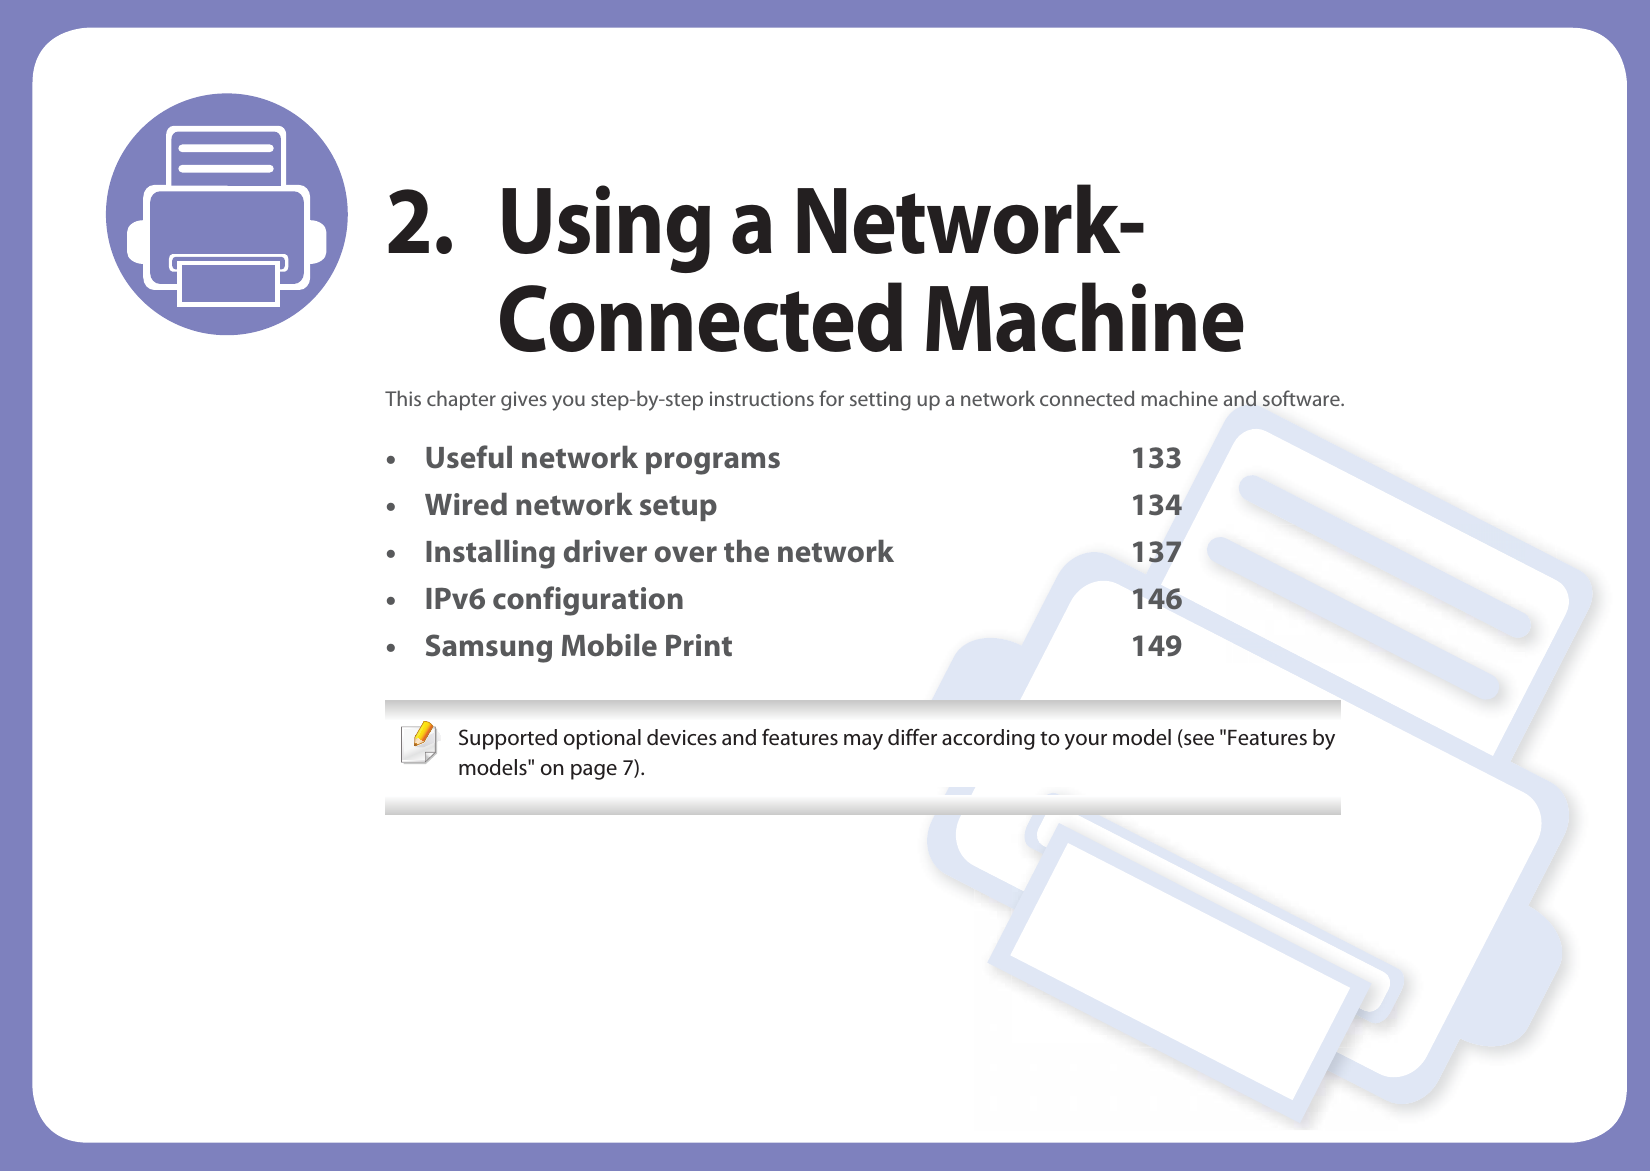 2. Using a Network-Connected MachineThis chapter gives you step-by-step instructions for setting up a network connected machine and software.• Useful network programs 133• Wired network setup 134• Installing driver over the network 137• IPv6 configuration 146• Samsung Mobile Print 149 Supported optional devices and features may differ according to your model (see &quot;Features by models&quot; on page 7). 